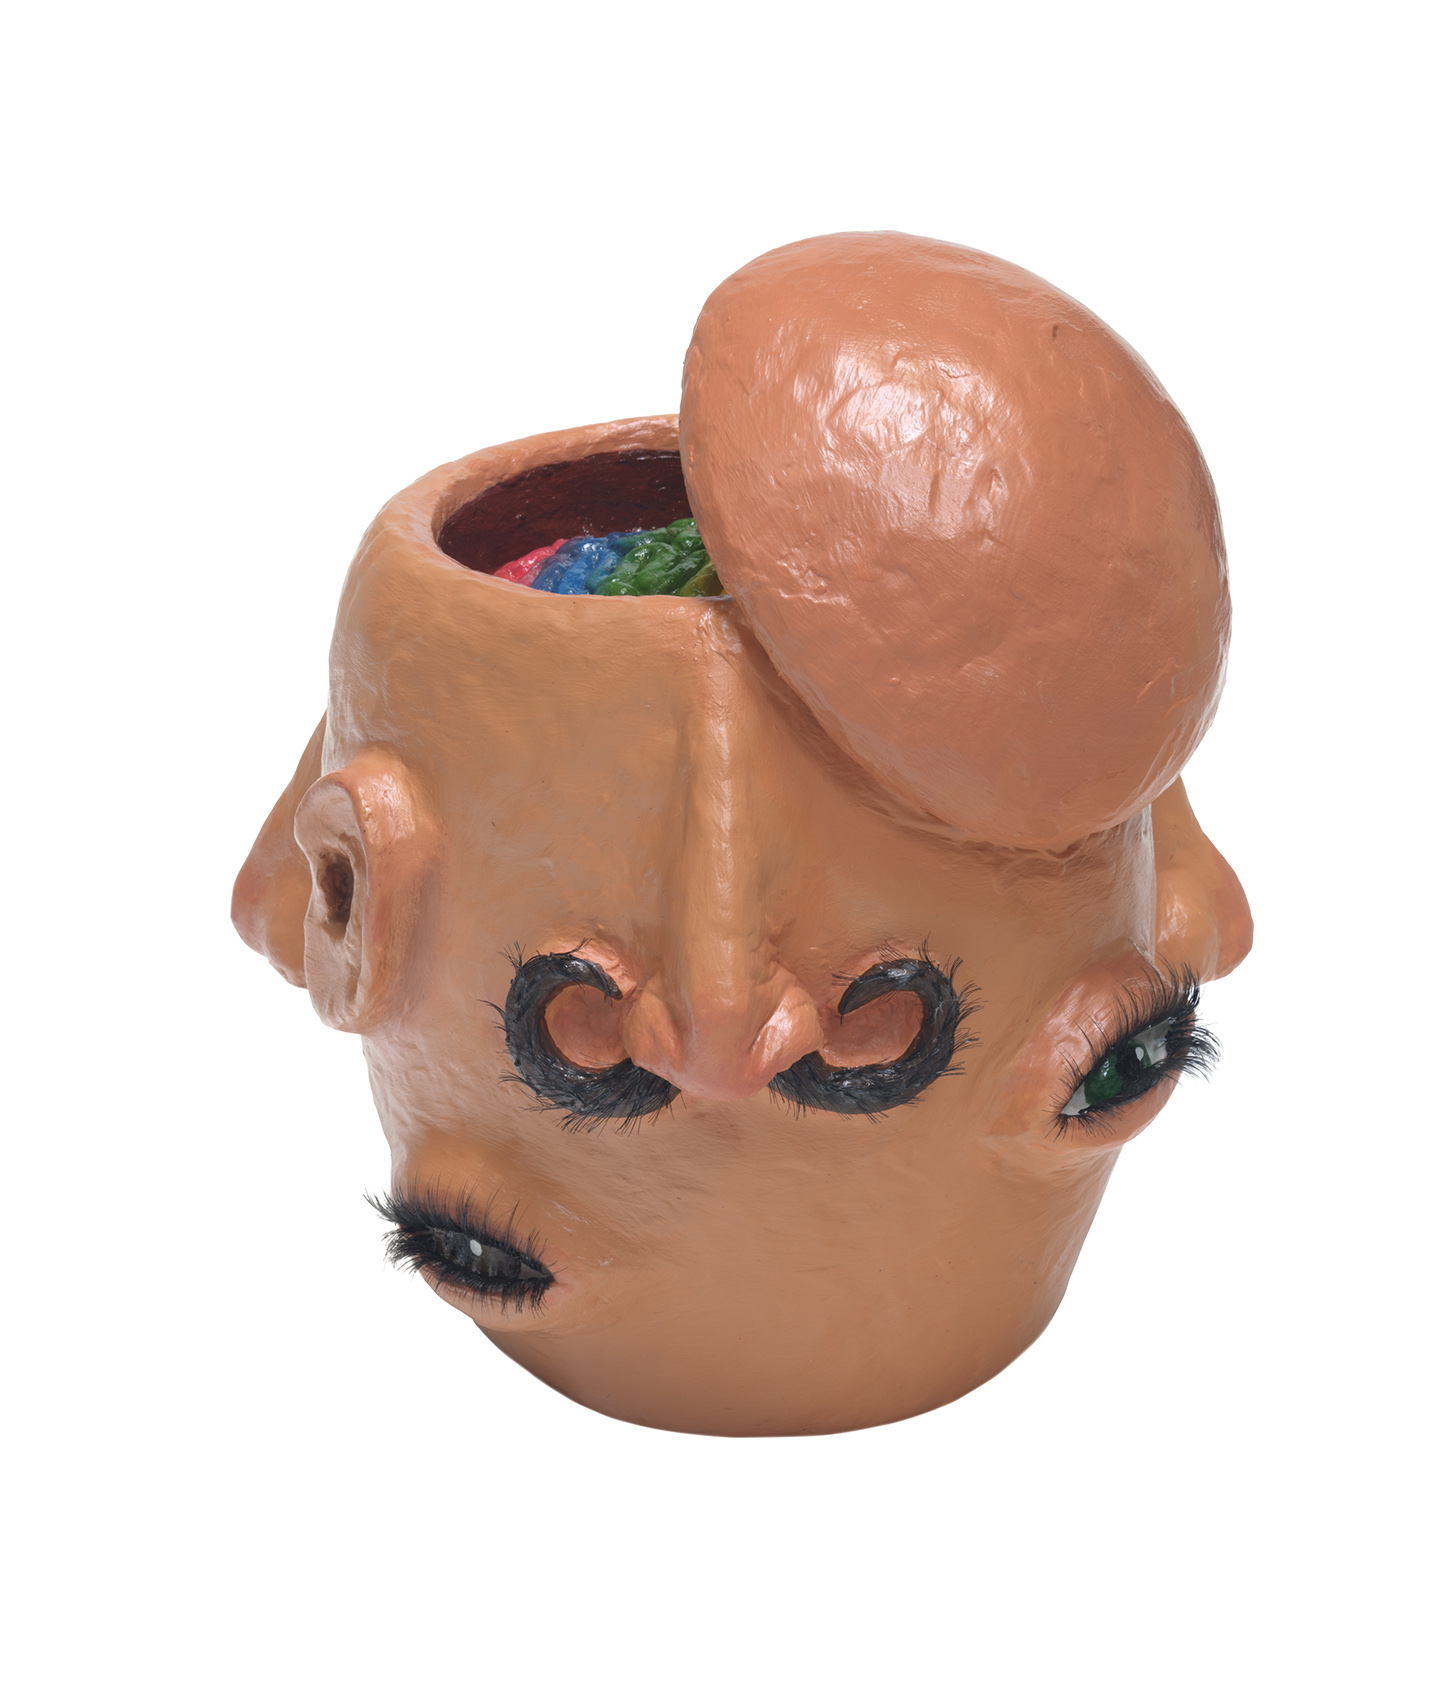 Head sculpted in clay with various facial features all around and top of skull open to reveal rainbow-coloured brain.